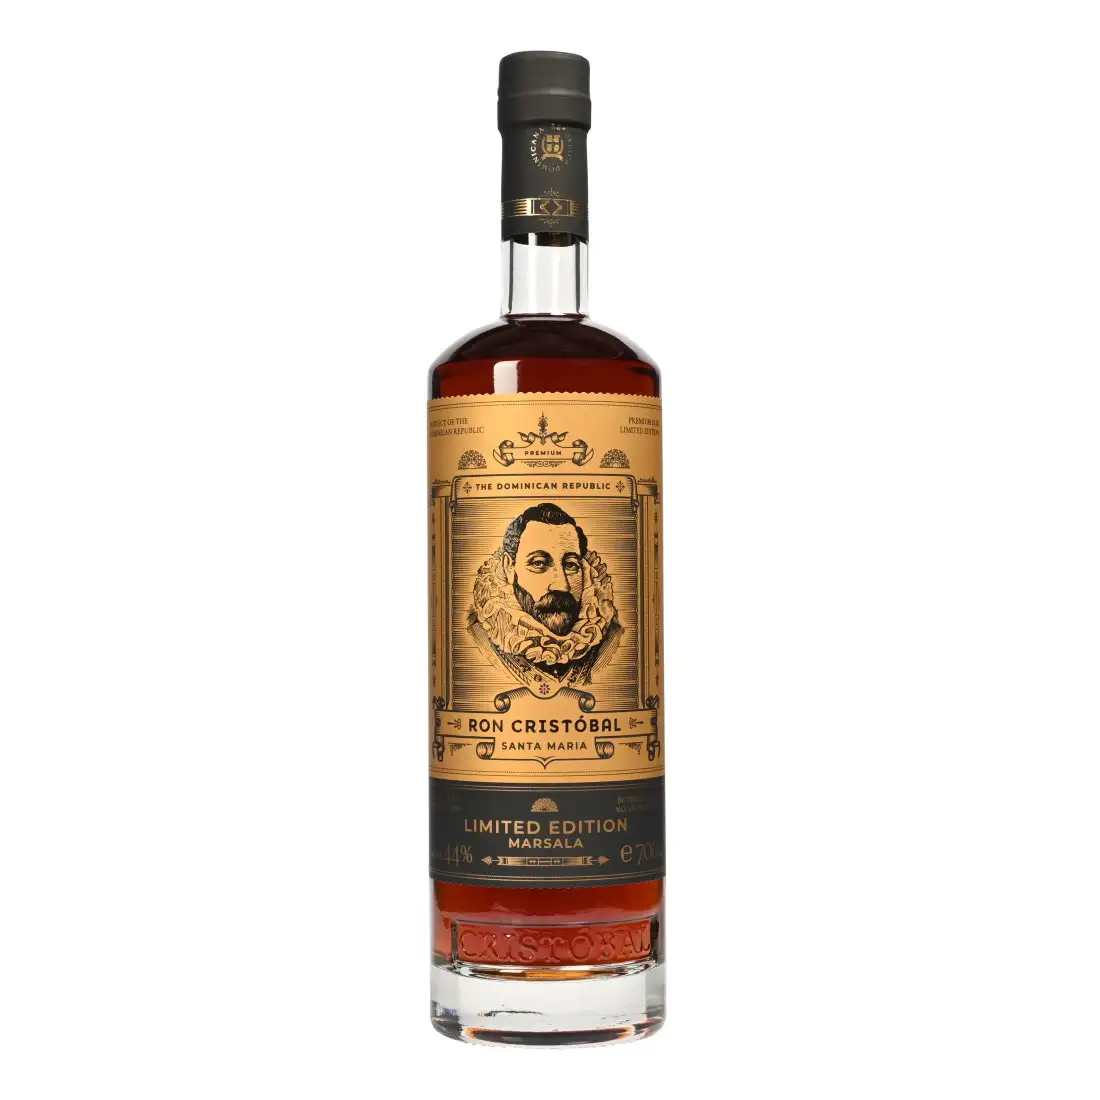 Image of the front of the bottle of the rum Ron Cristóbal Santa Maria Marsala (Limited Edition)